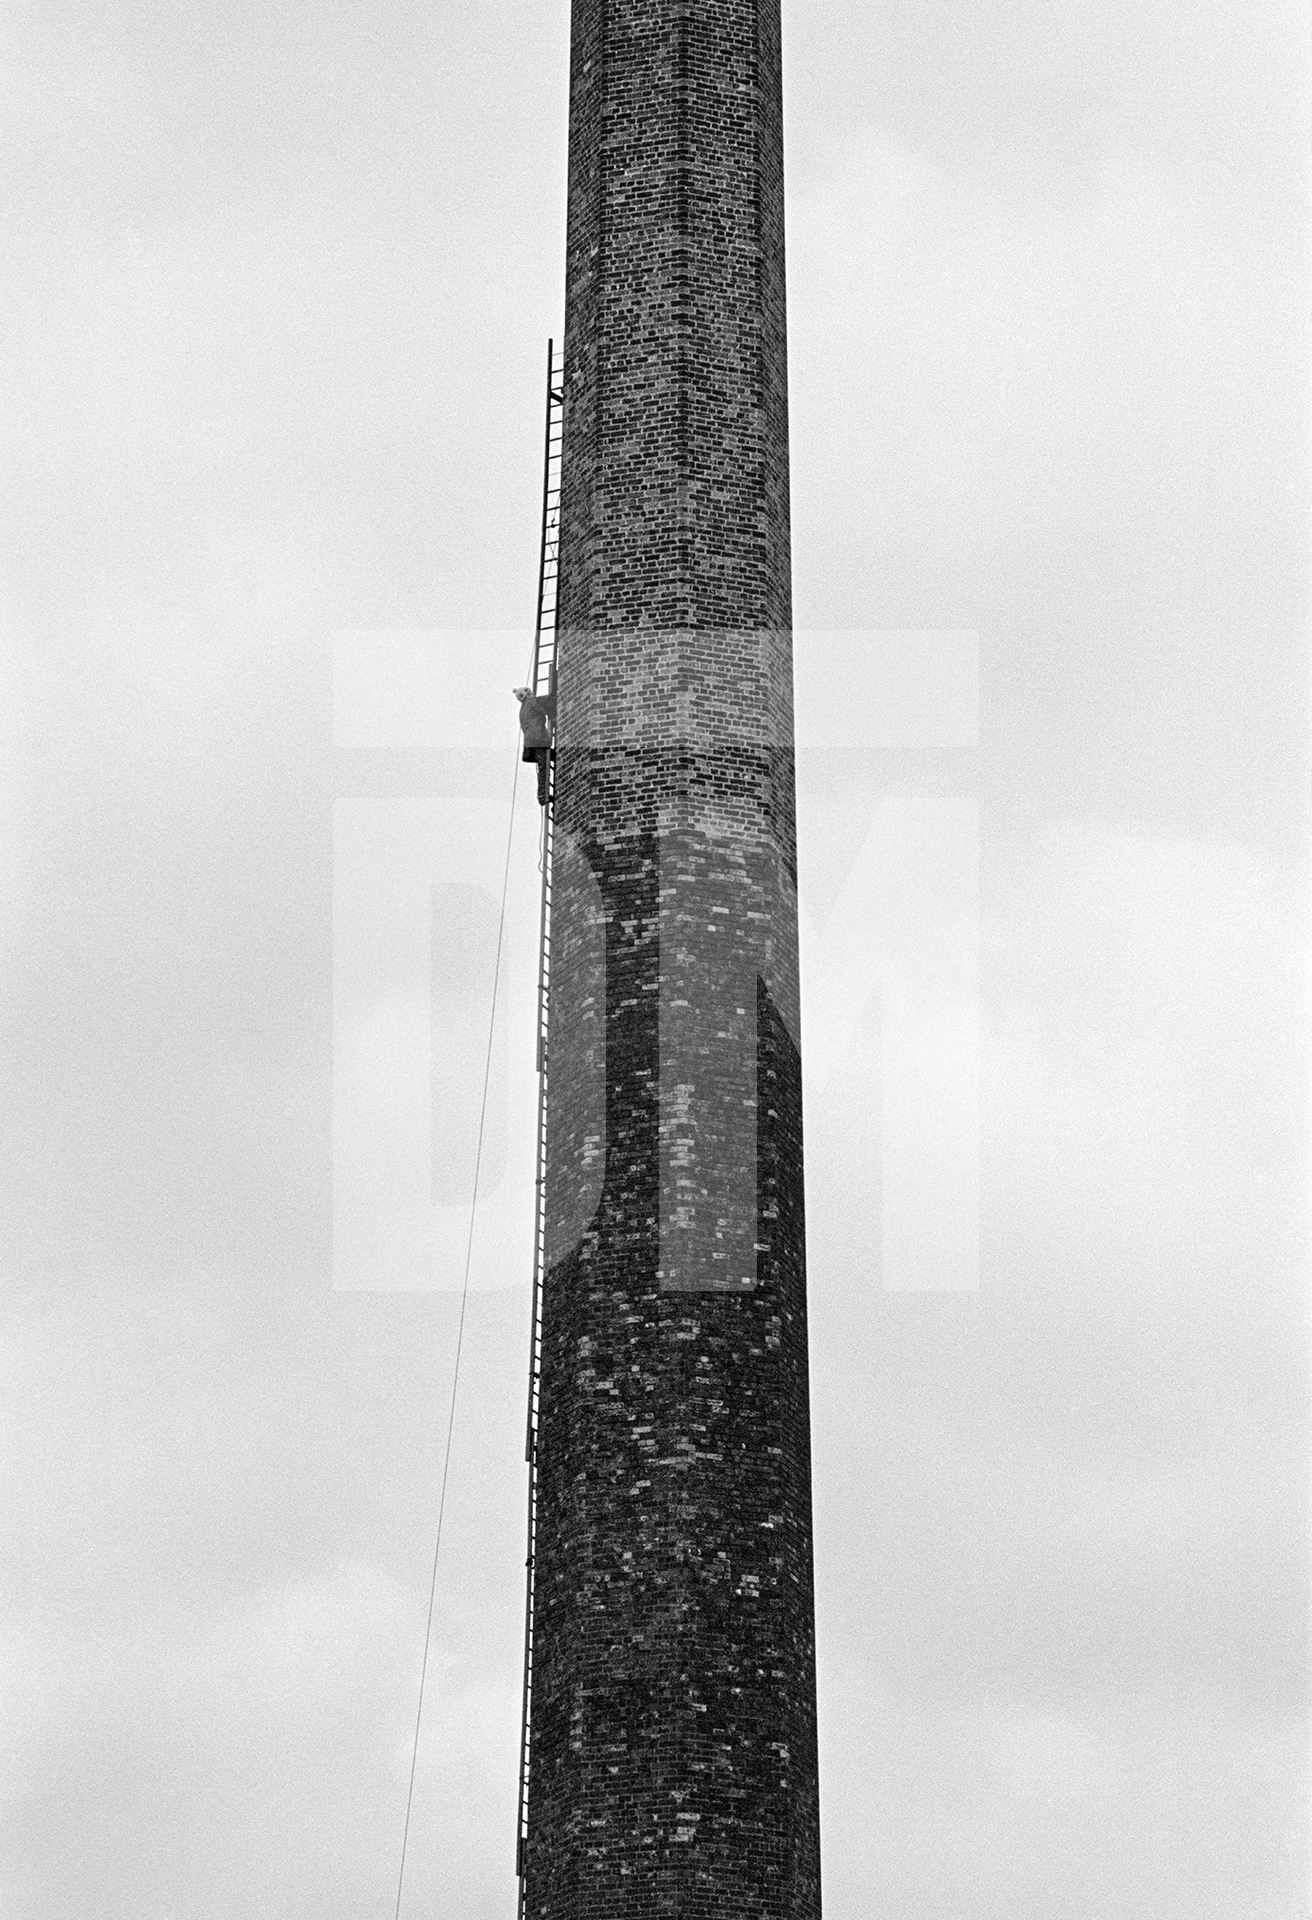 Laddering prior to demolition. Half way up. September 1976 by Daniel Meadows